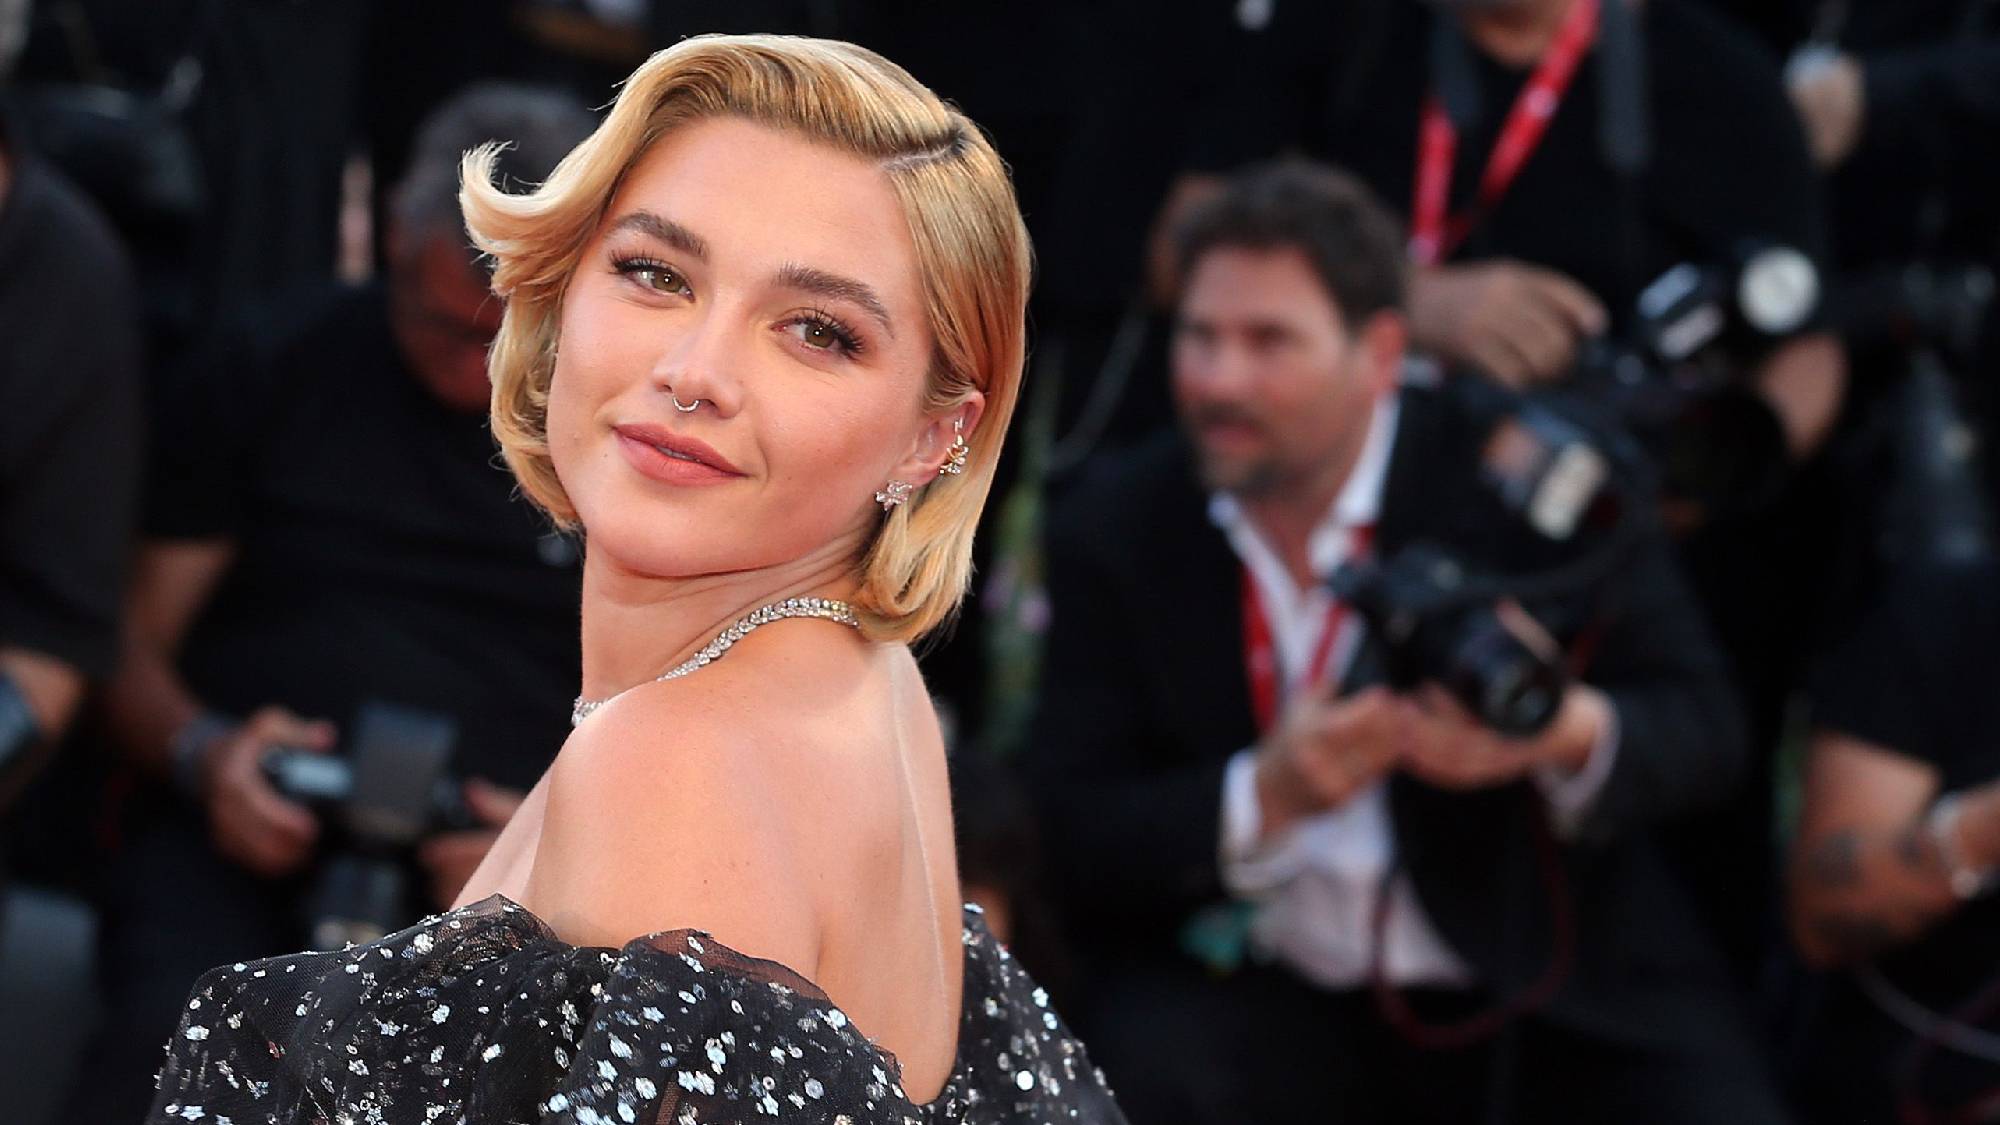 Florence Pugh says she's 'not complying' with Hollywood body standards